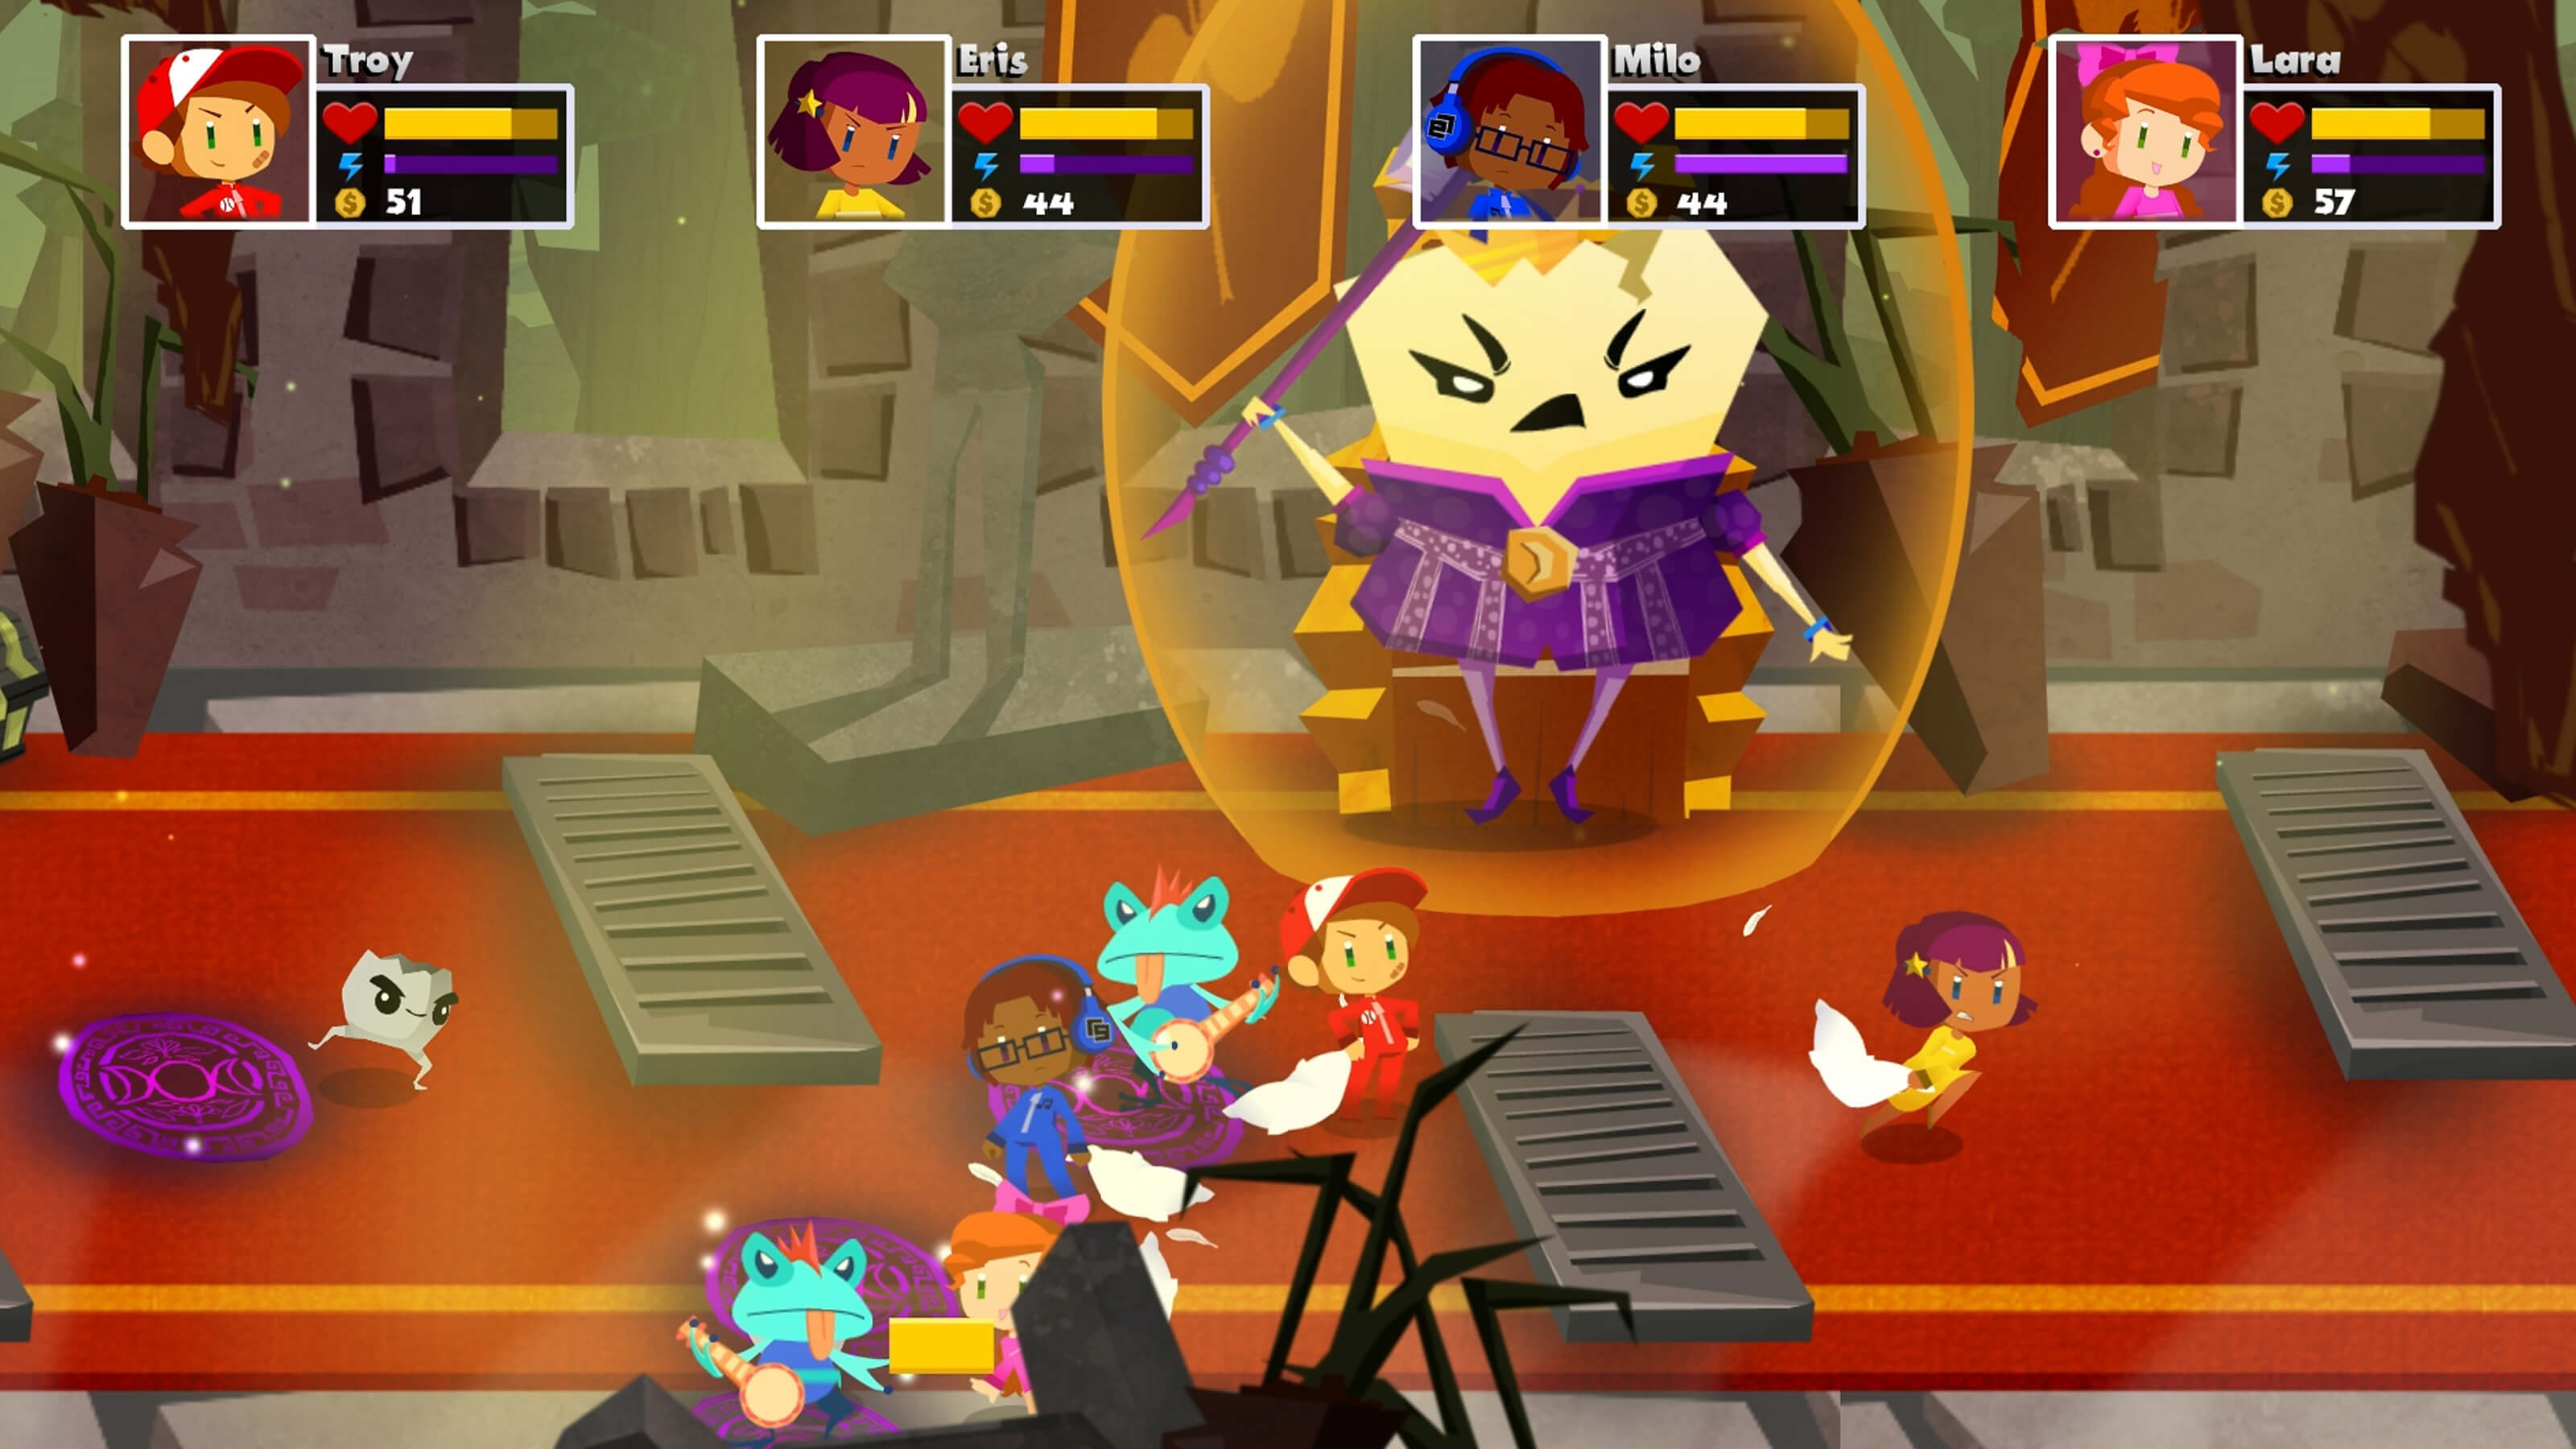 The four main characters battle with banjo wielding frogs and an evil egg shell. 